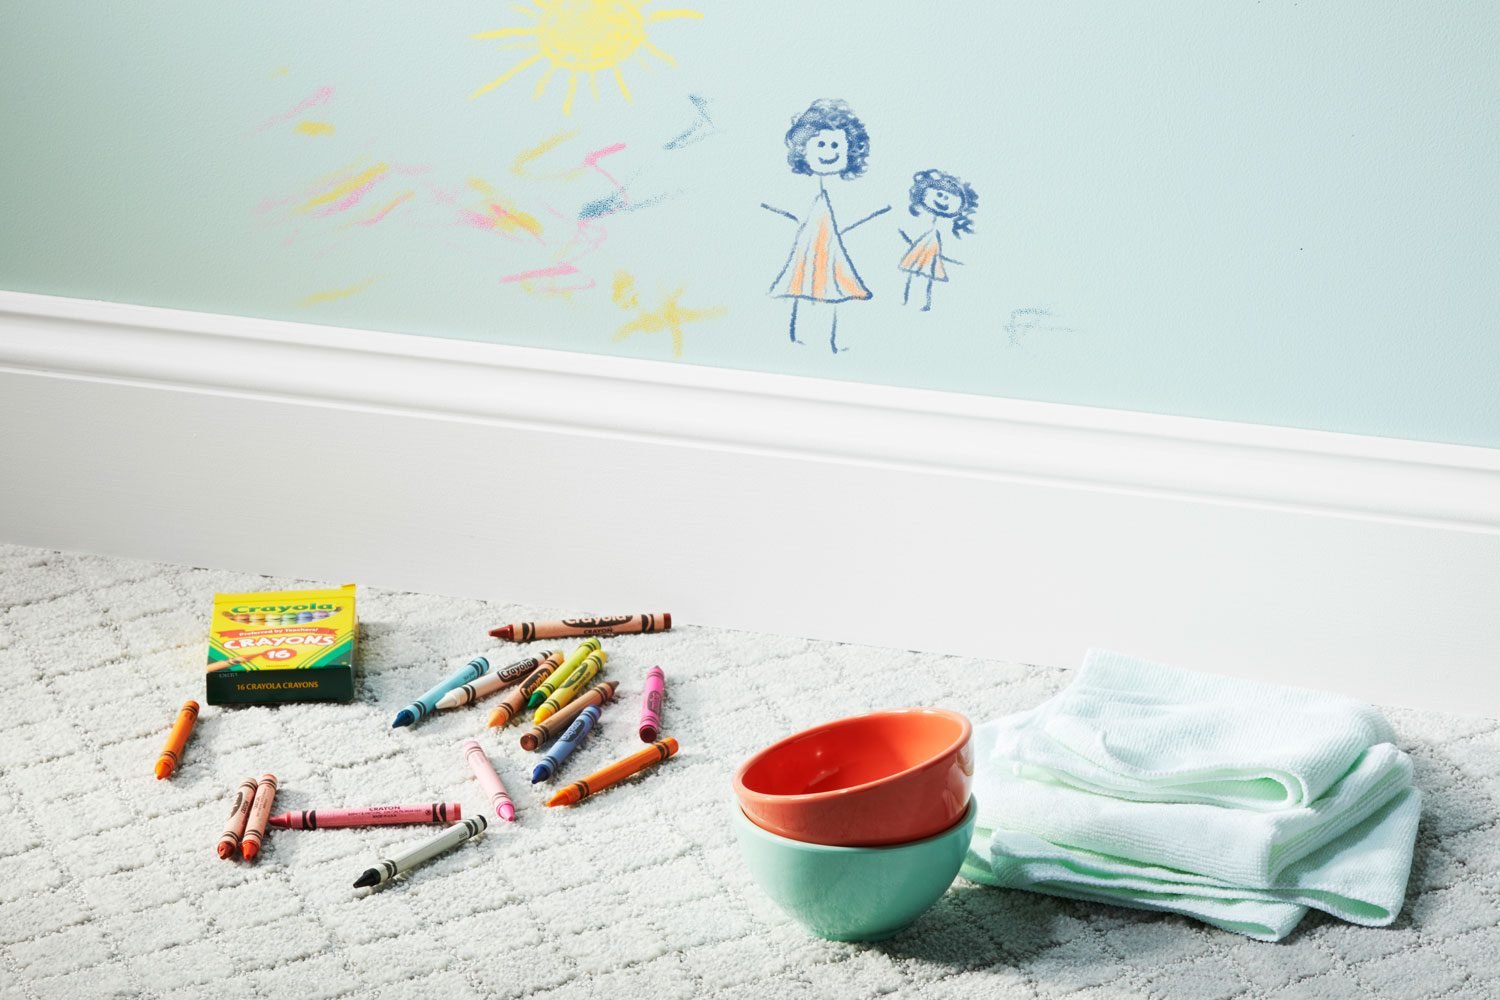 crayon drawing on a light blue wall with crayons, bowls, and cleaning cloths on the floor